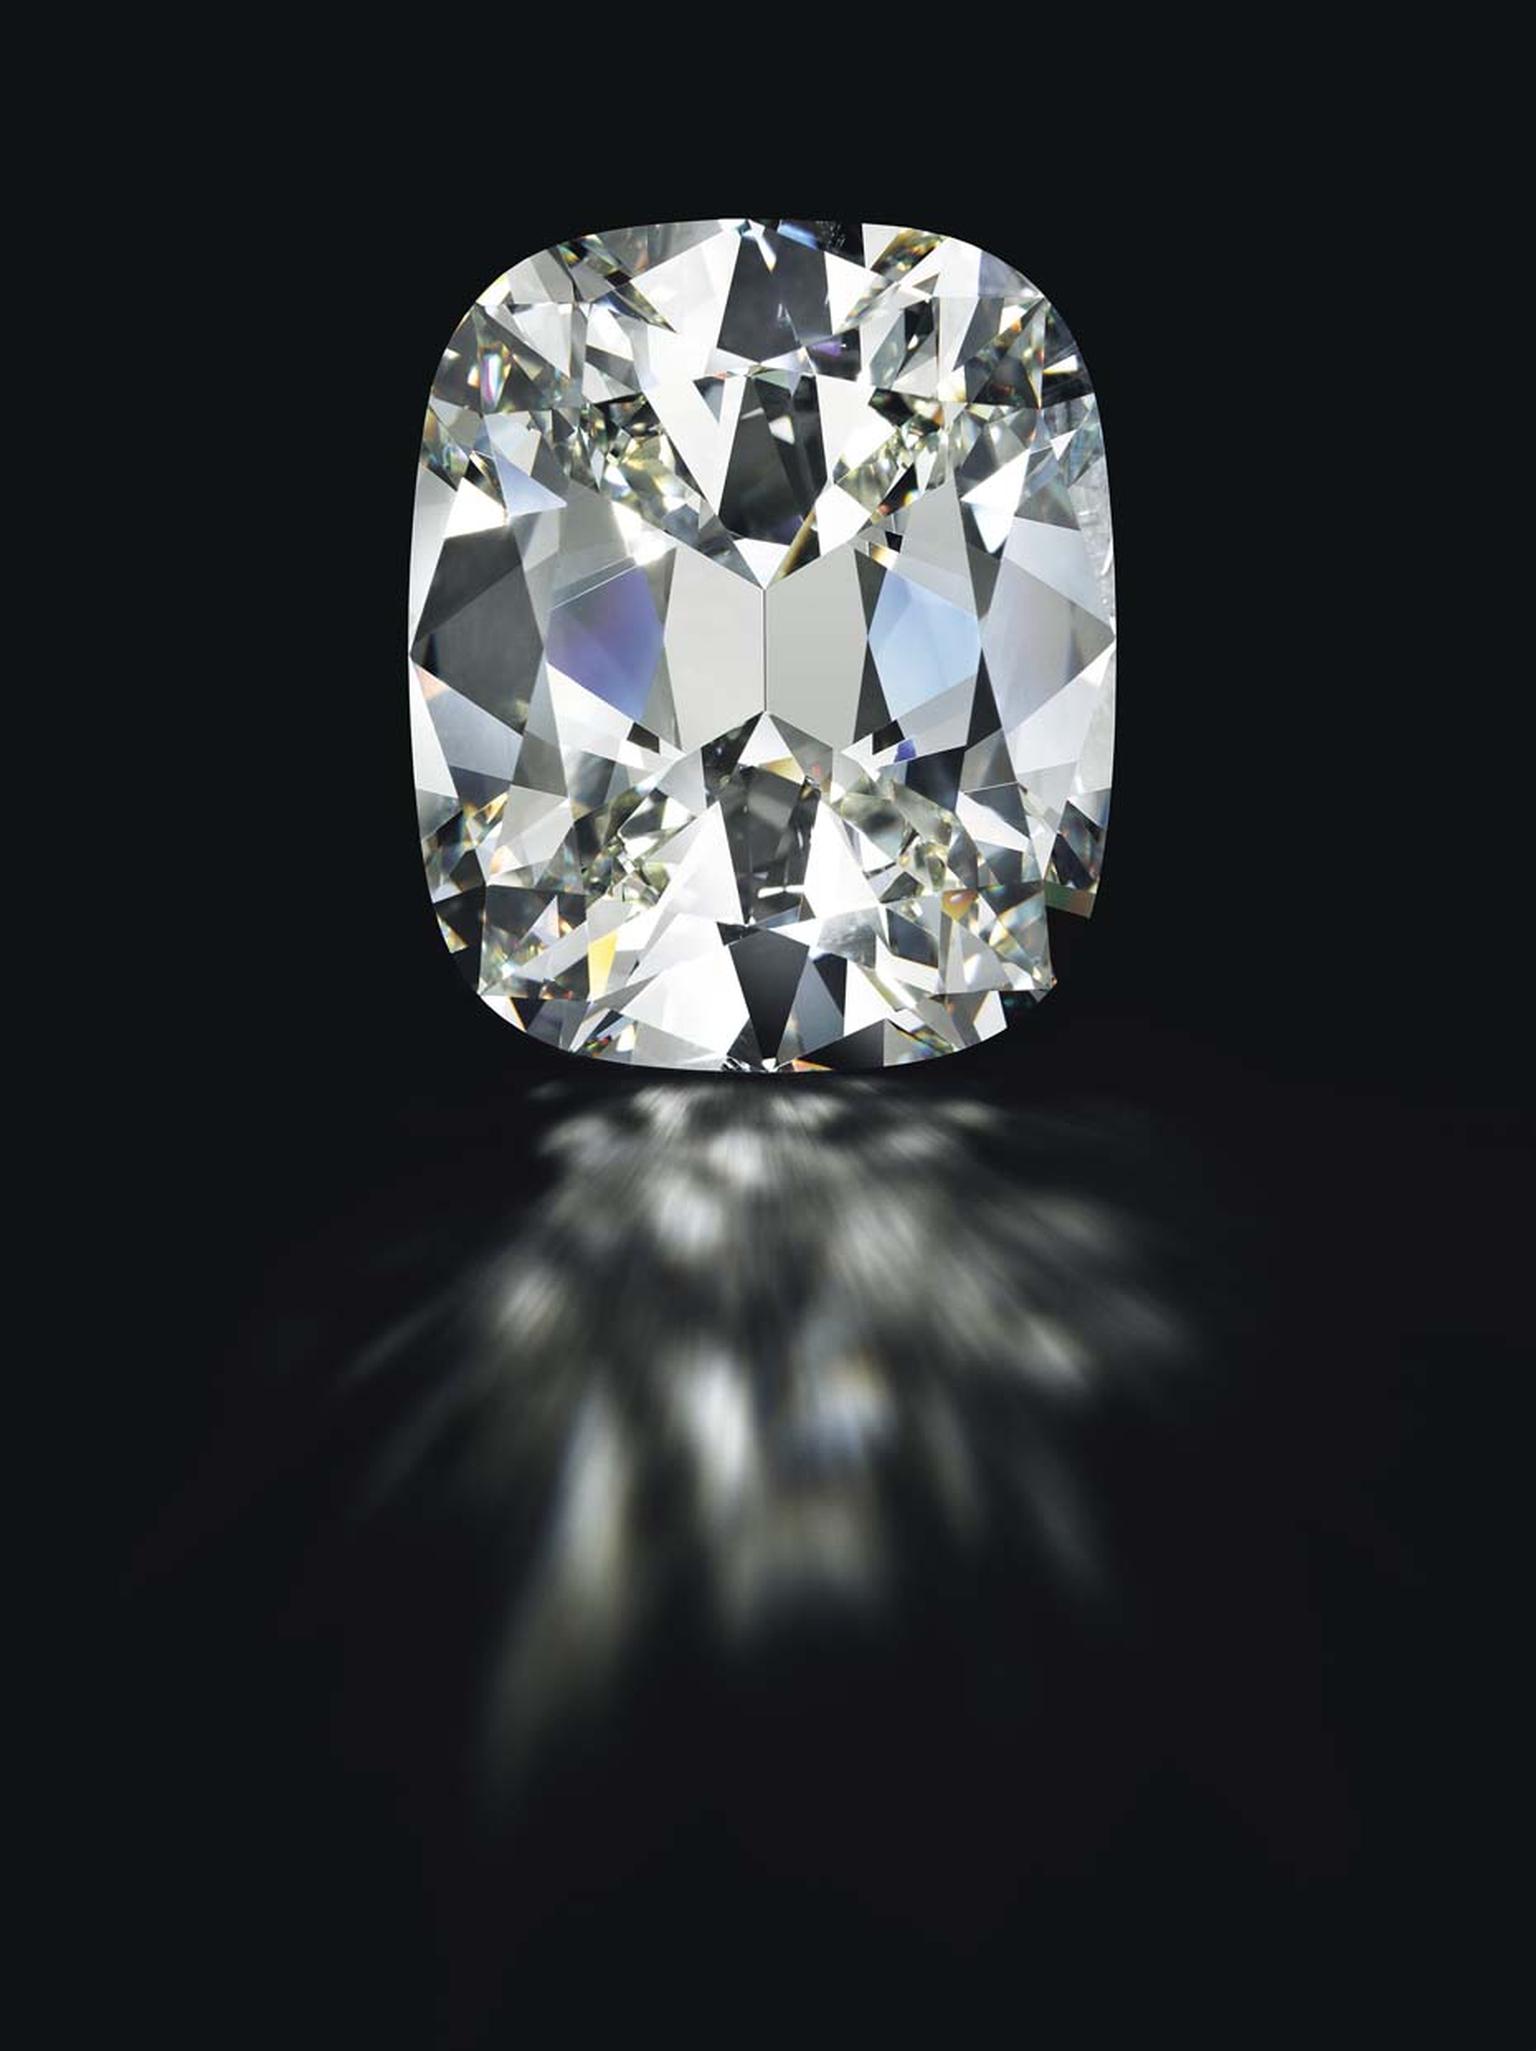 Another top lot at the Magnificent Jewels auction at Christie's New York on 14 April is this cushion-shaped 80.73ct diamond, with an estimate of $4-5 million.